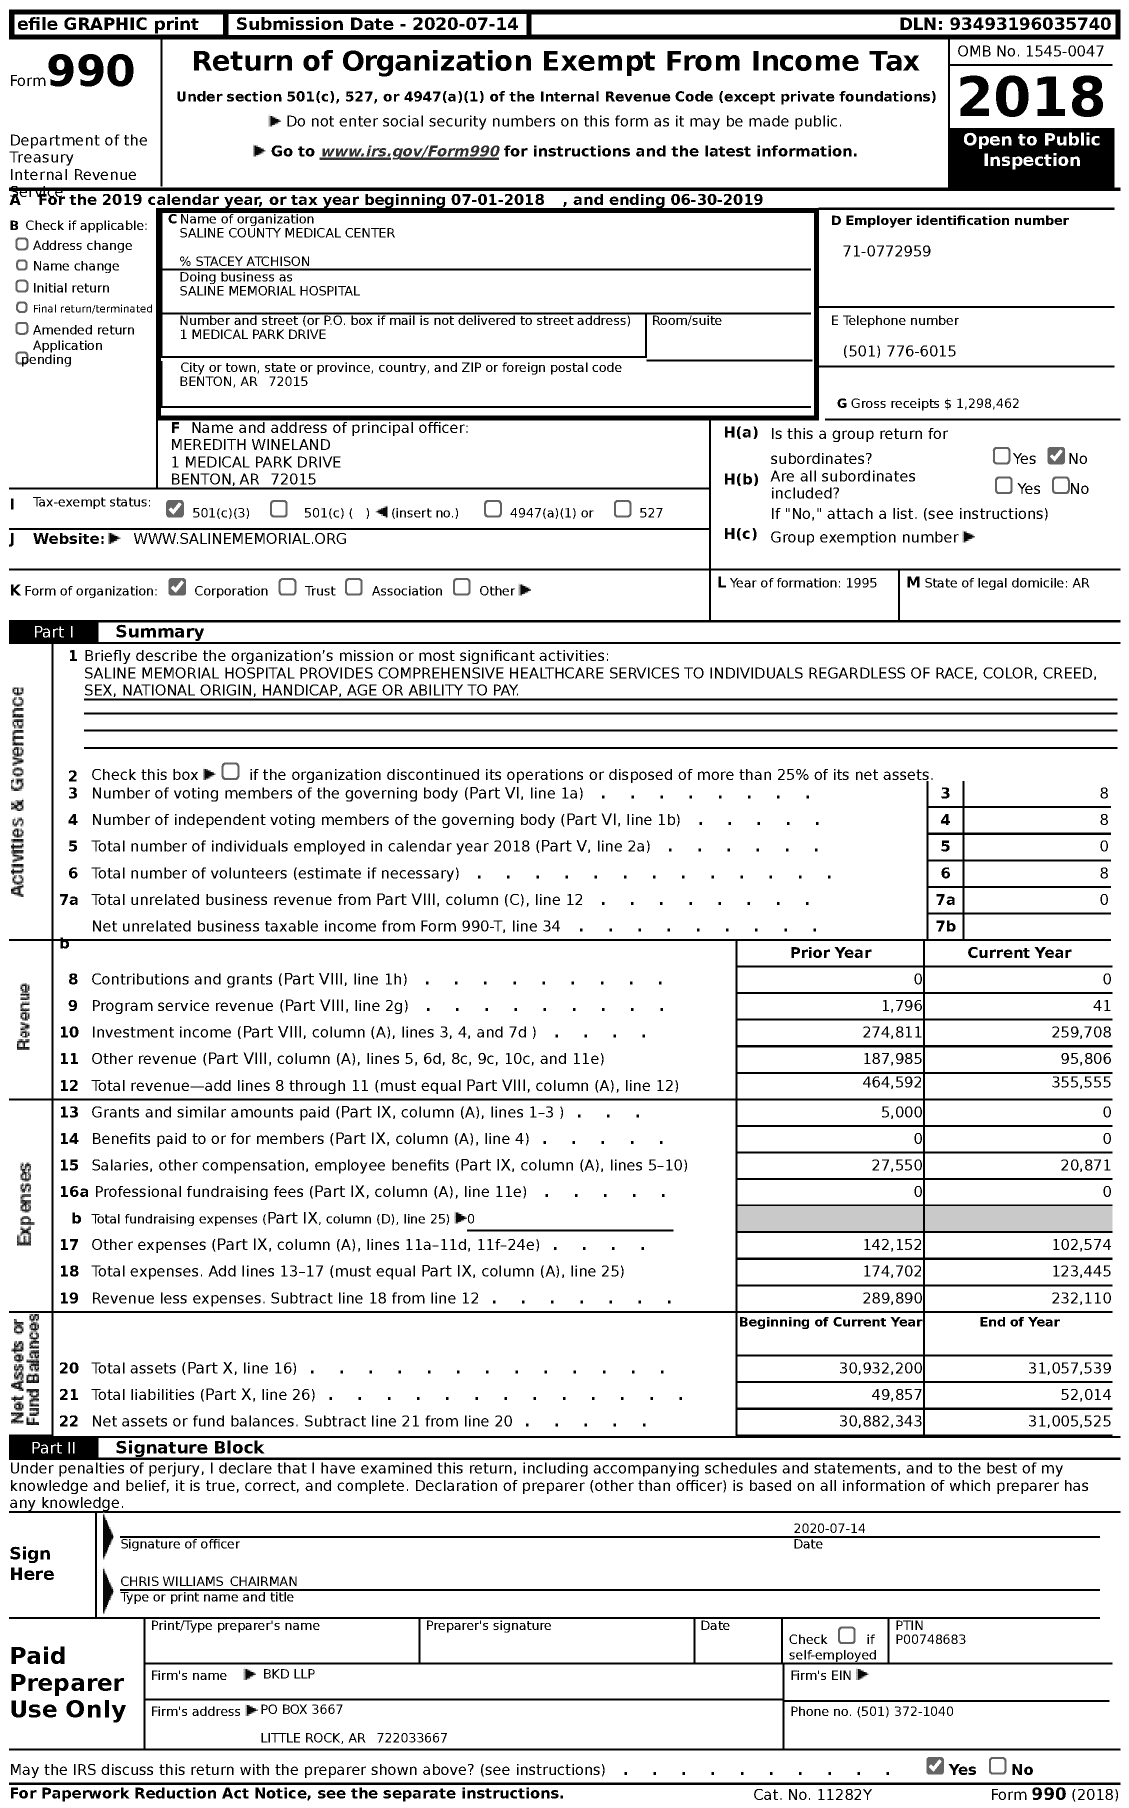 Image of first page of 2018 Form 990 for Saline Memorial Hospital (SMH)